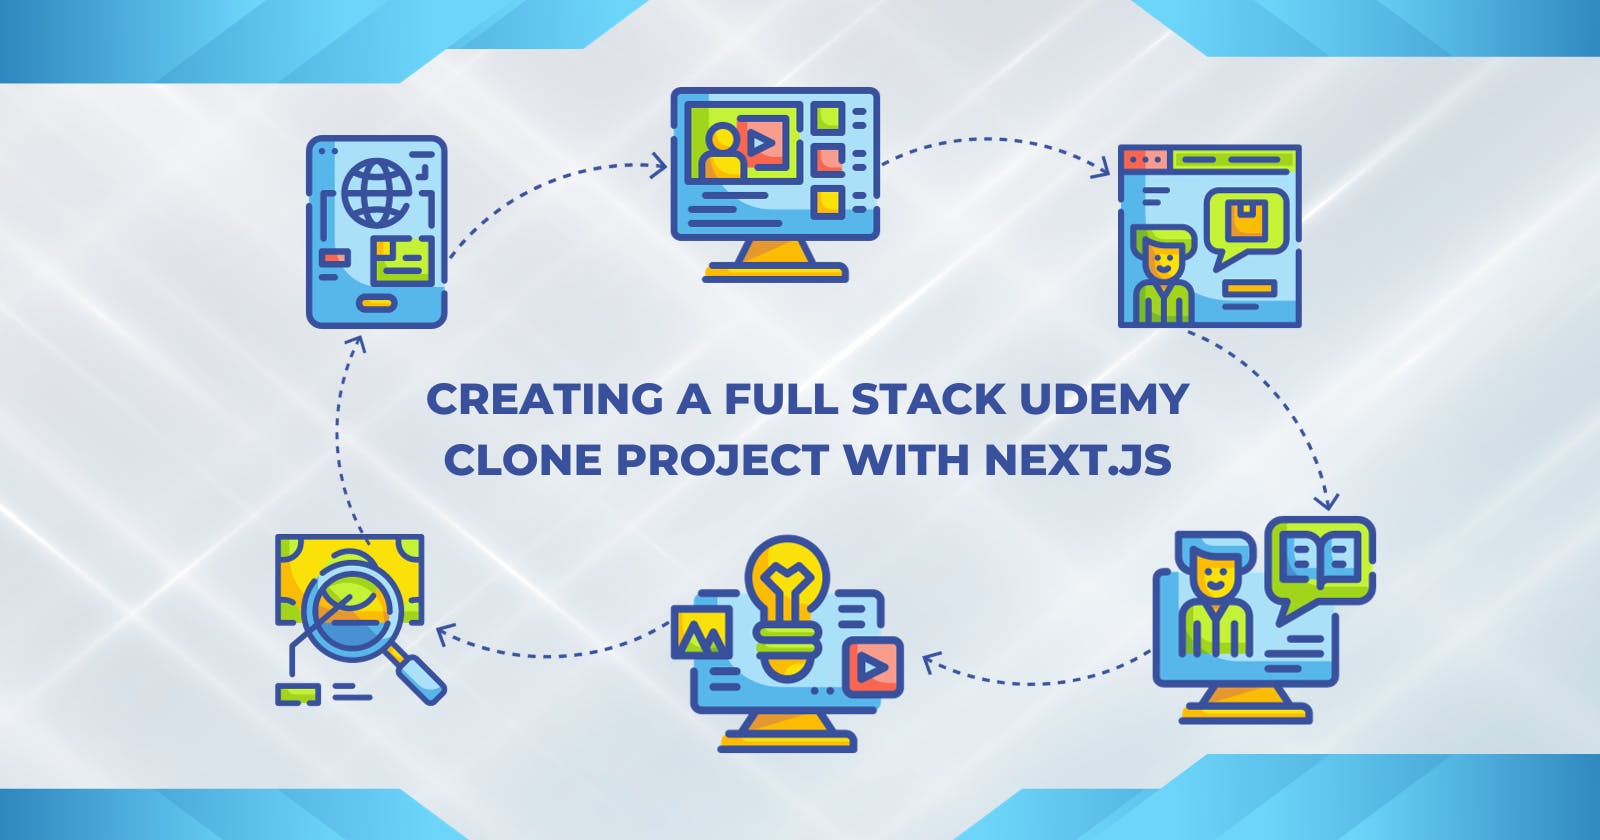 Creating a Full Stack Udemy Clone Project with Next.js